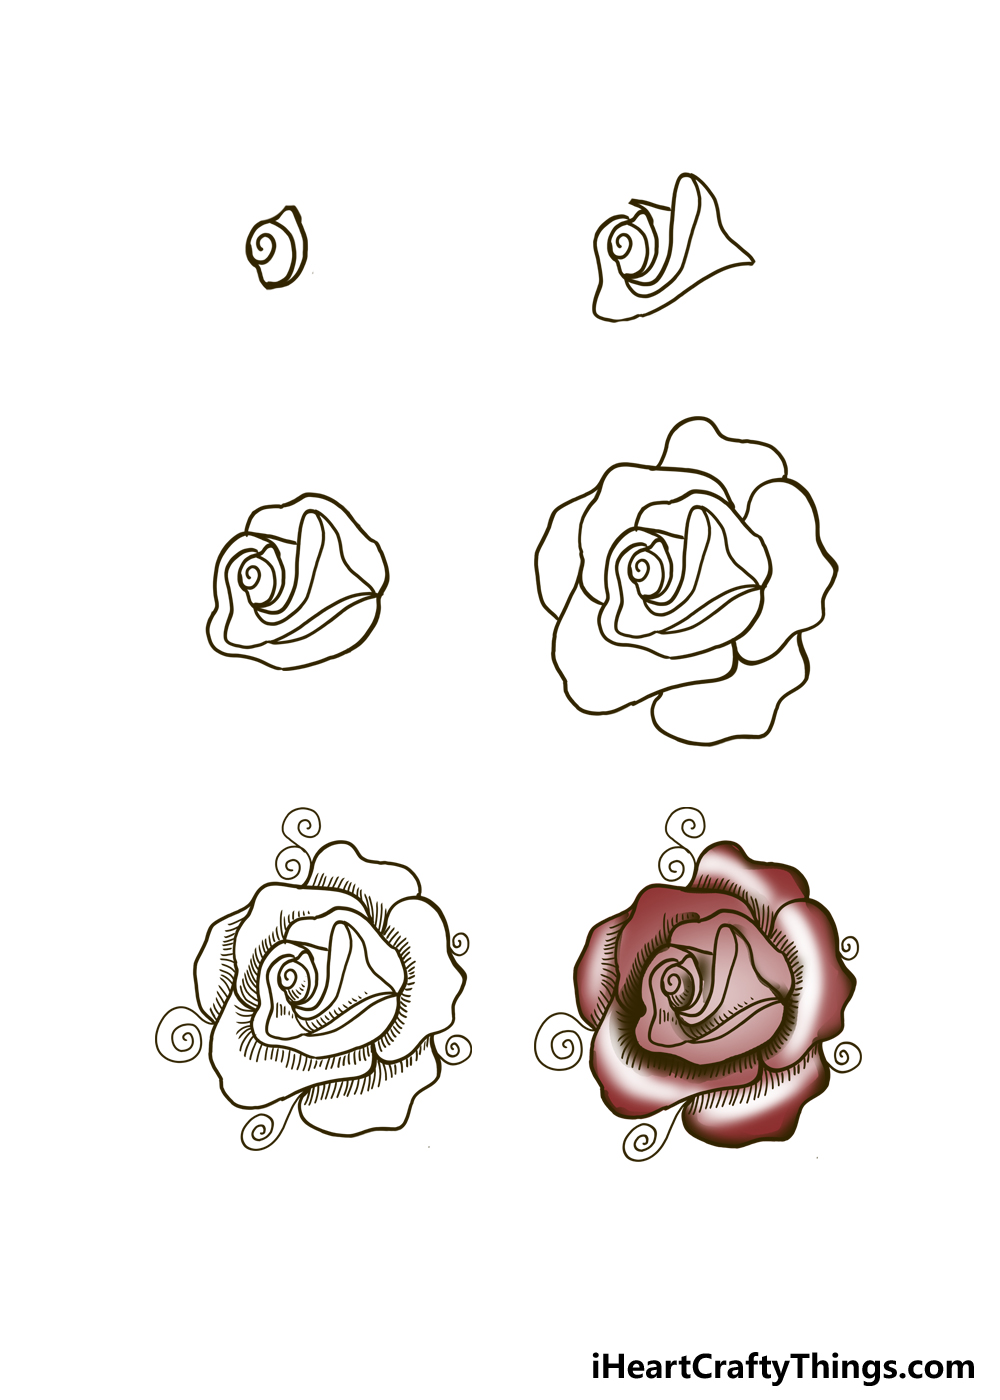 How to Draw A Rose Tattoo